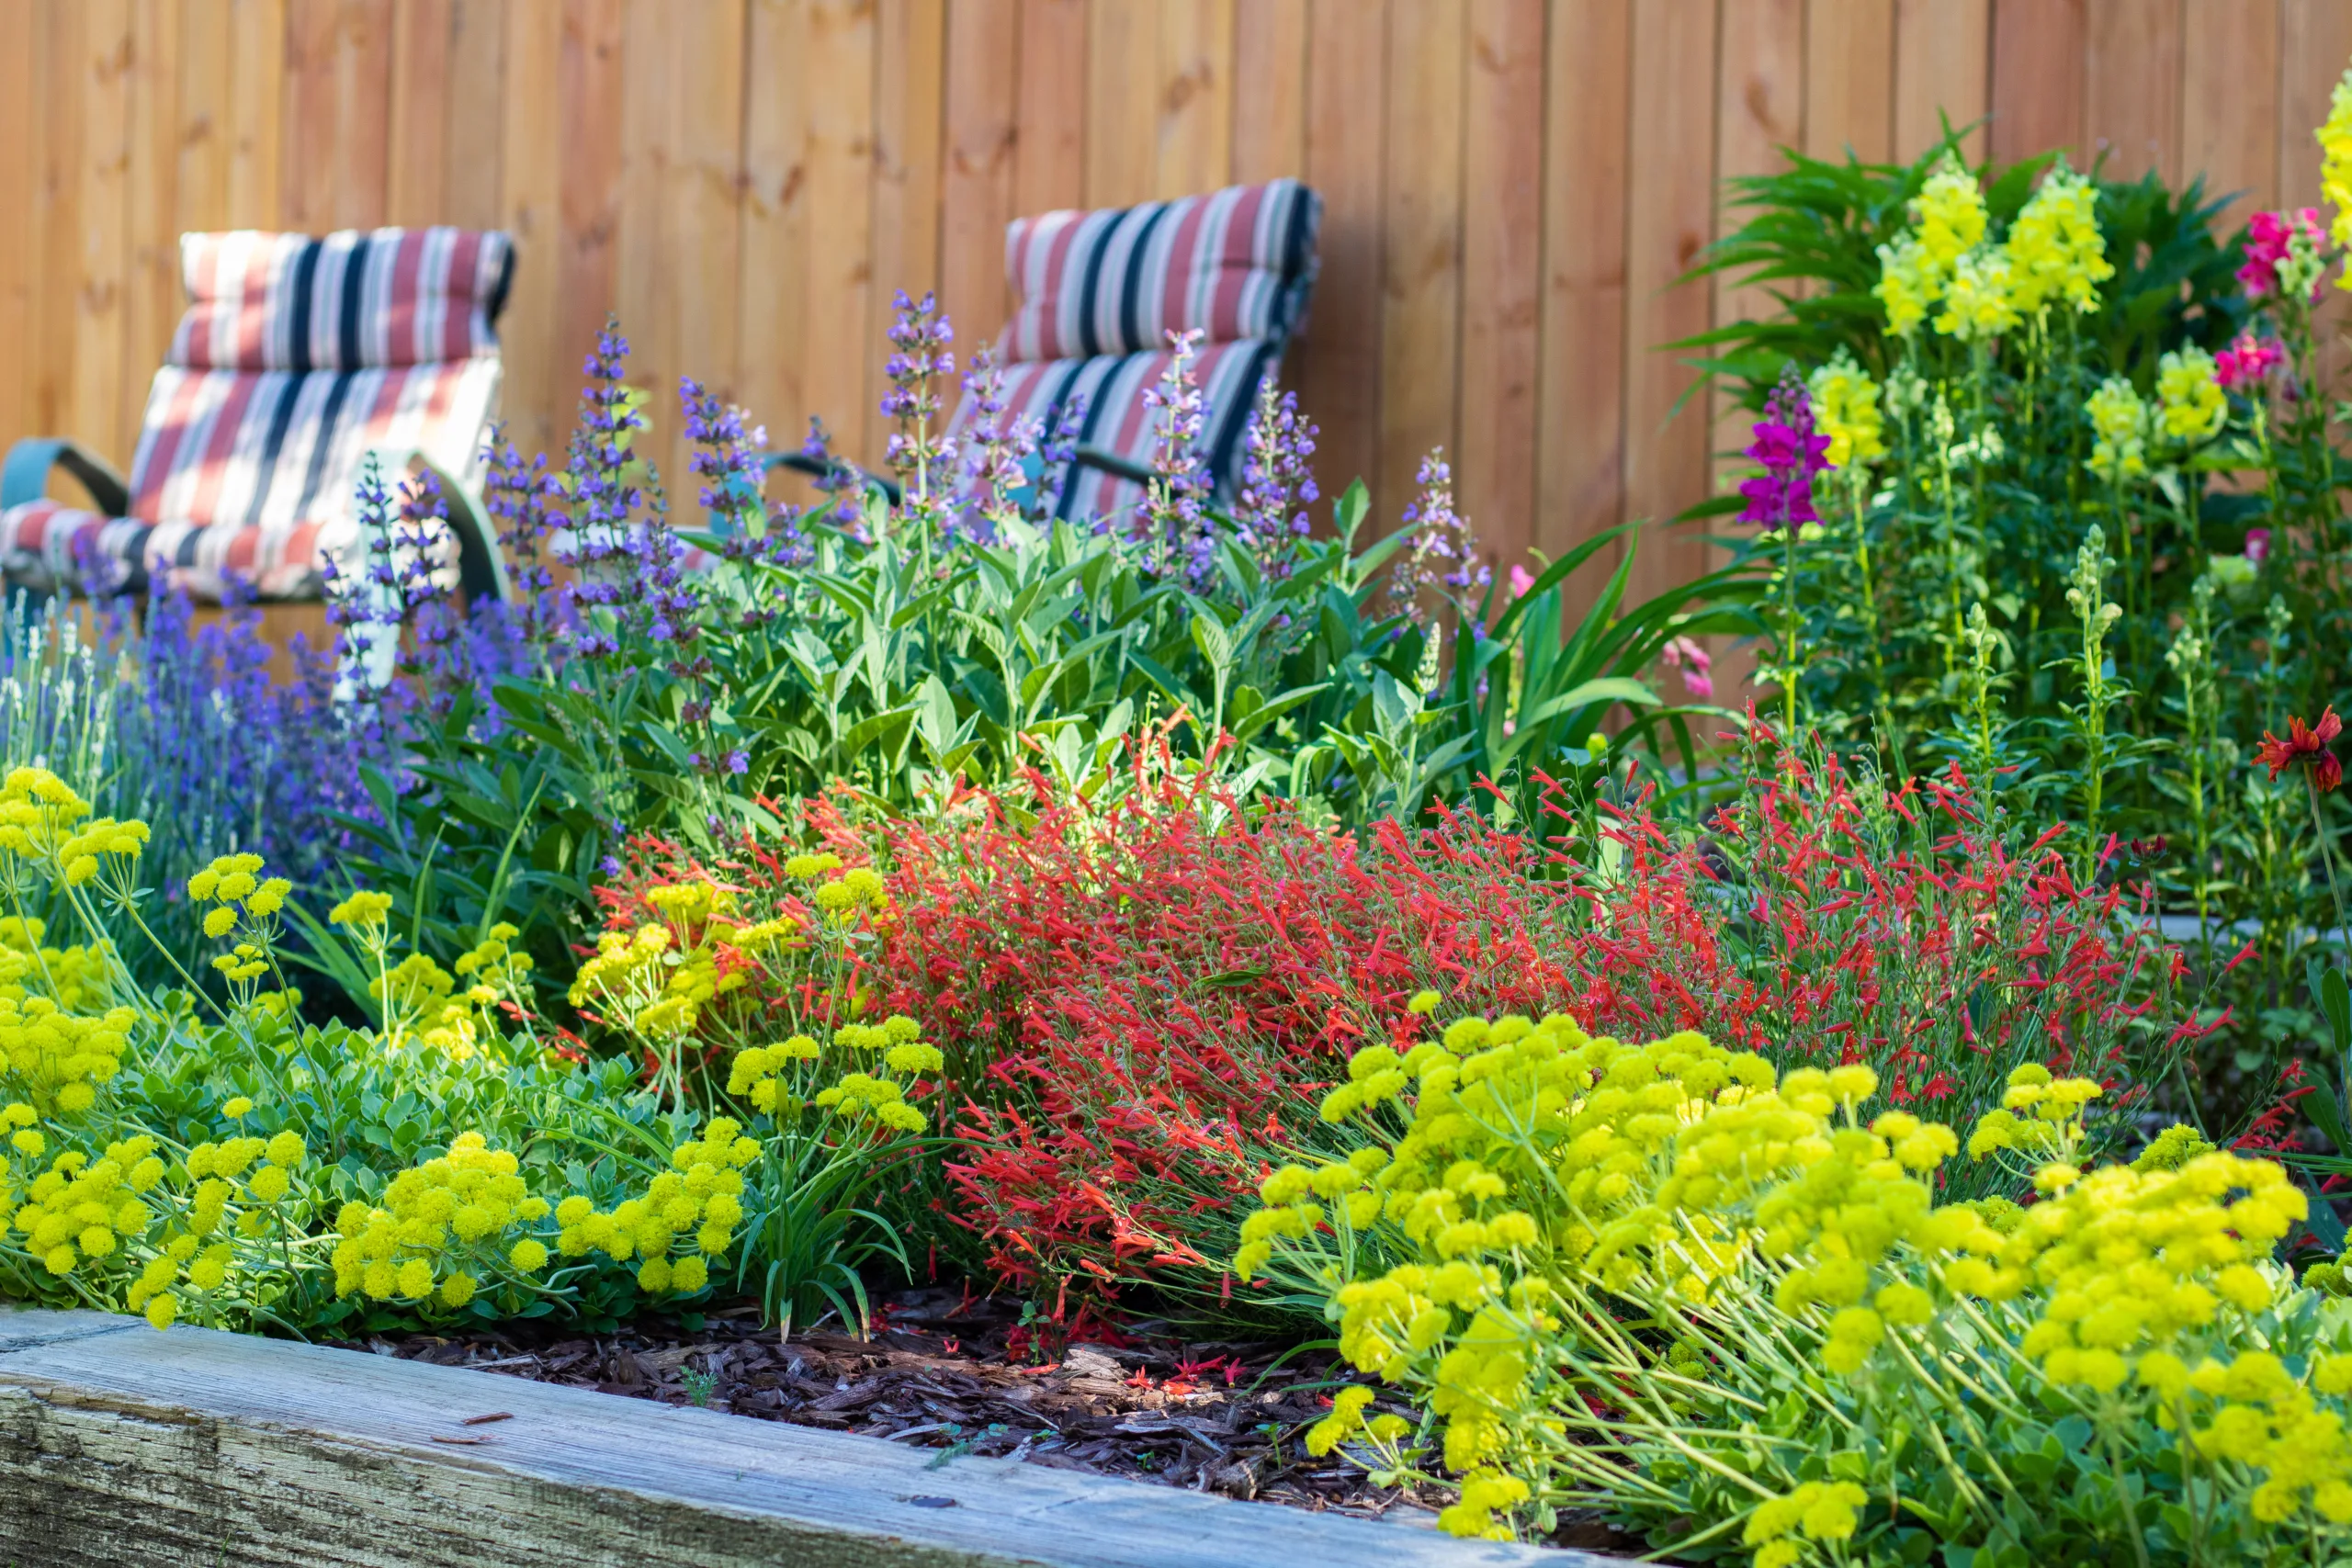 Colorful drought-tolerant plants in a raise garden bed in a sunny backyard with lawn chairs in the background